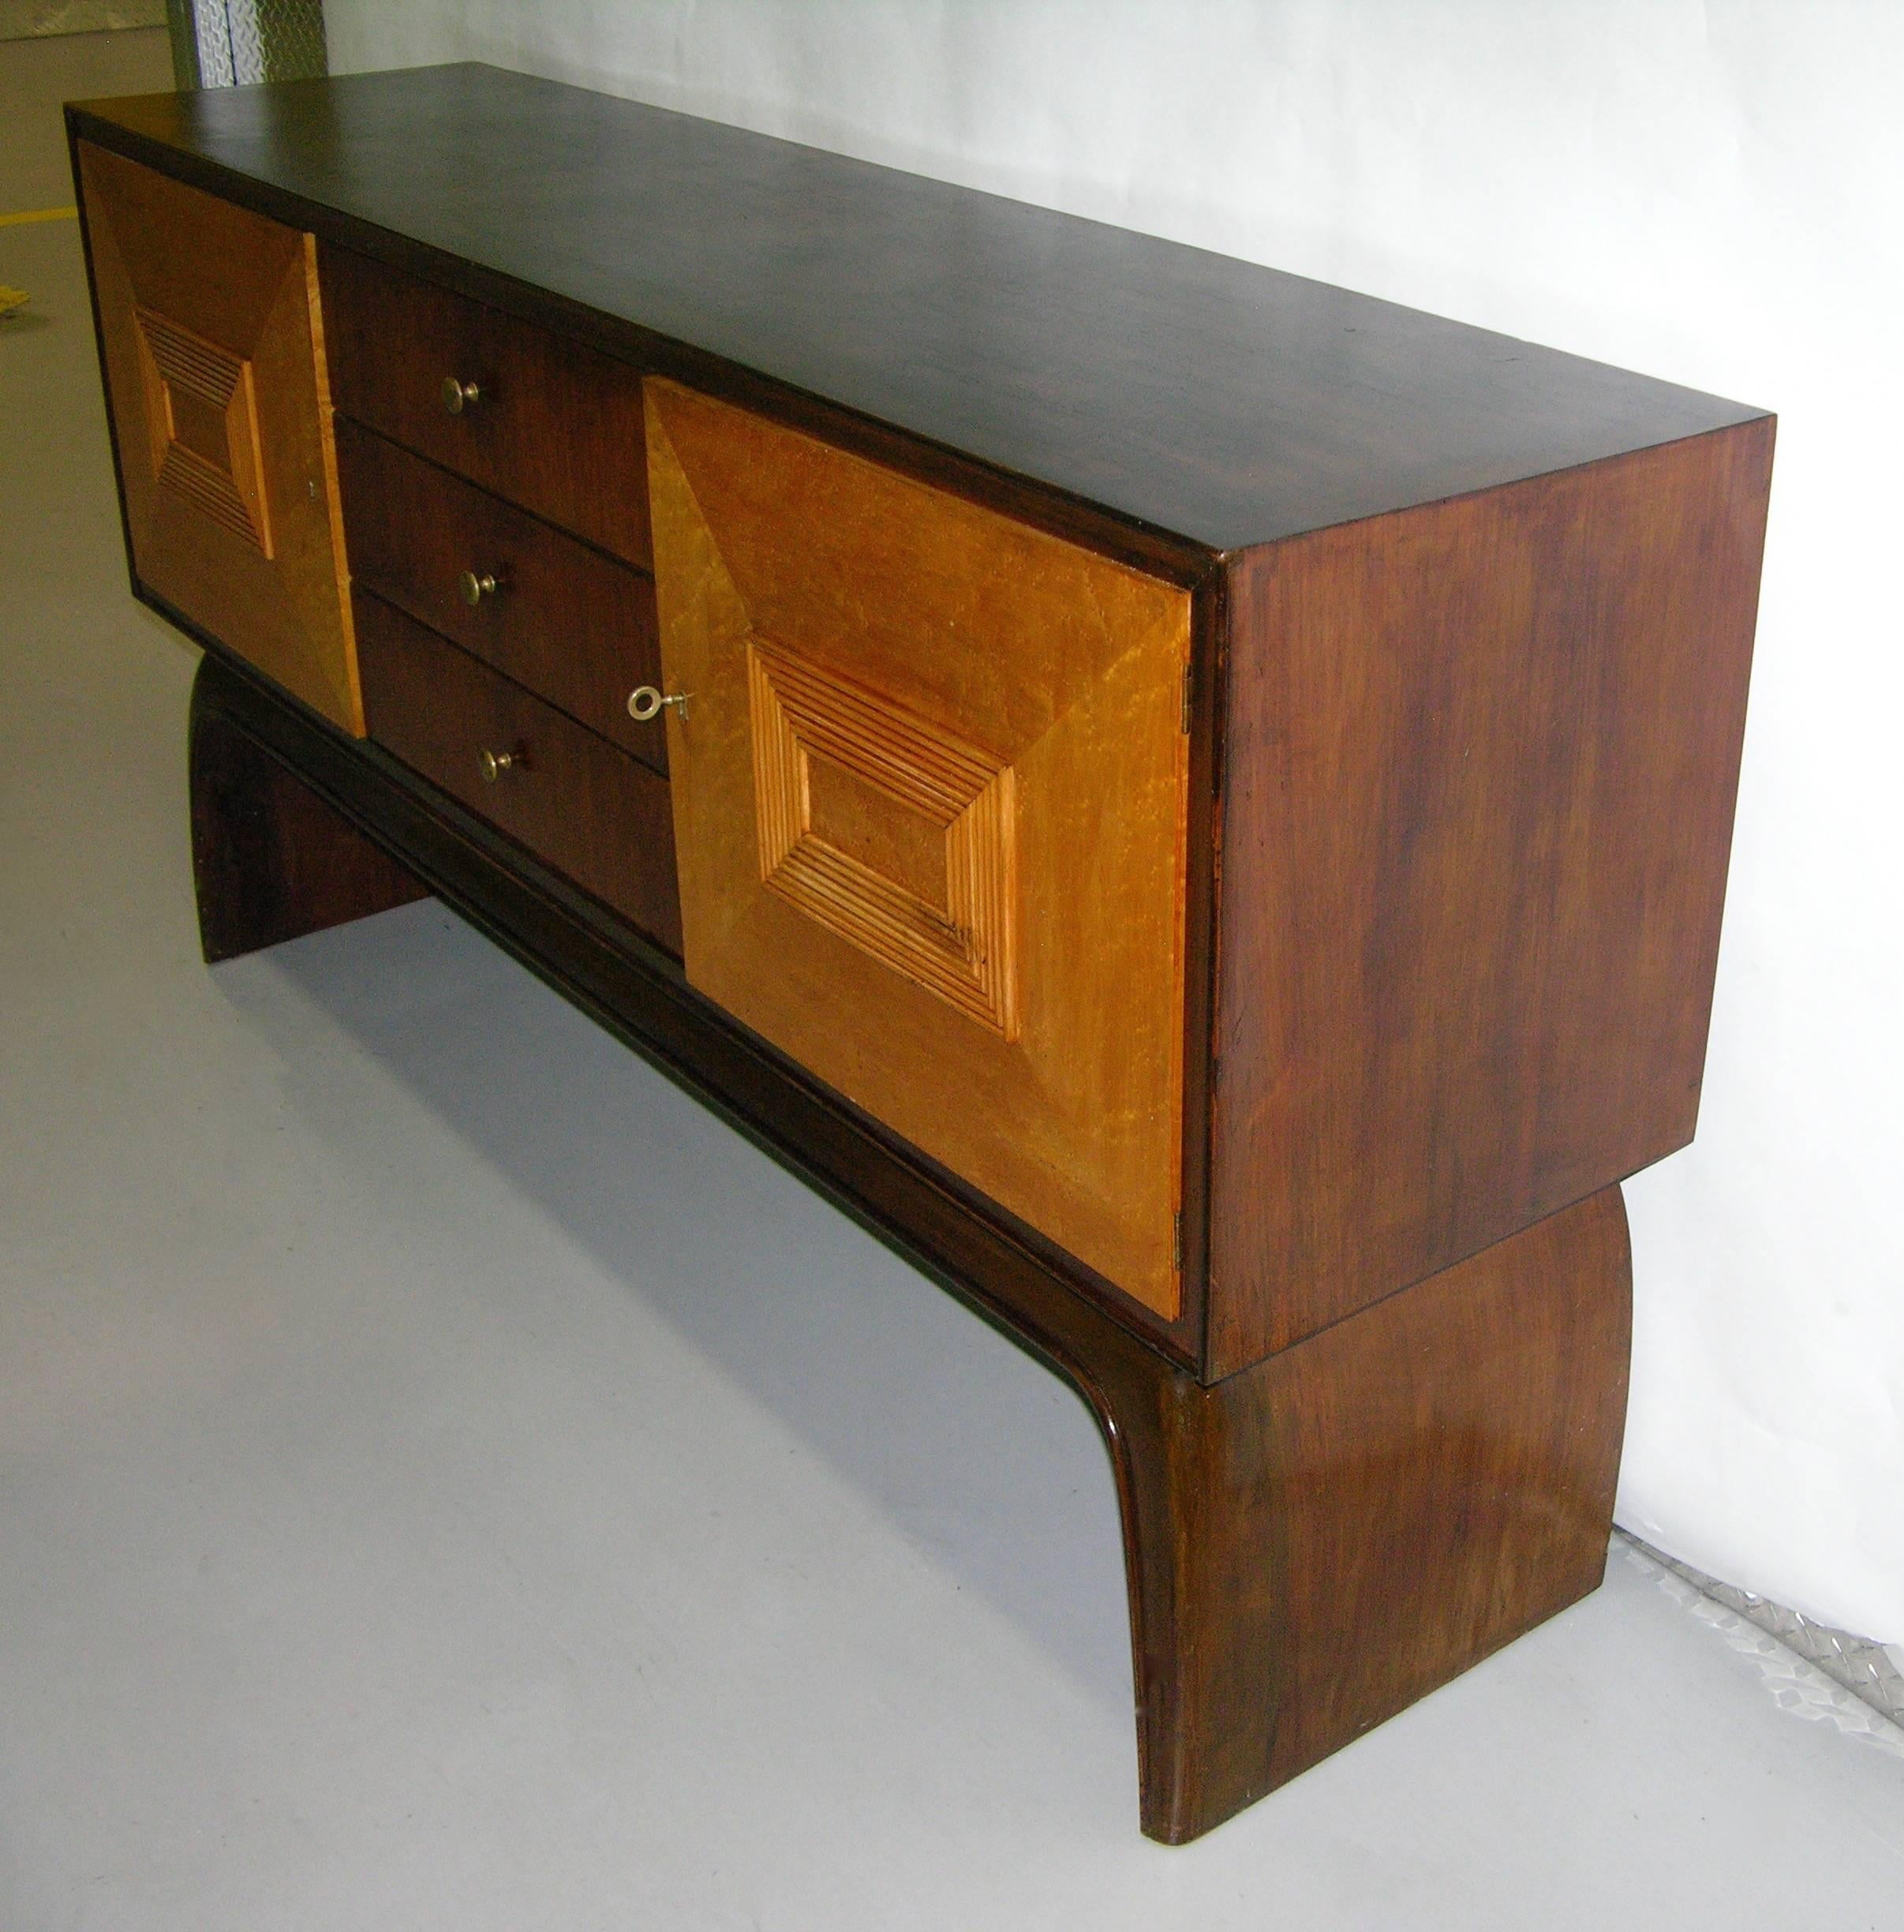 Veneer 1930 Italian Antique Art Deco Two-Tone Rosewood and Burl Maple Sideboard/Console